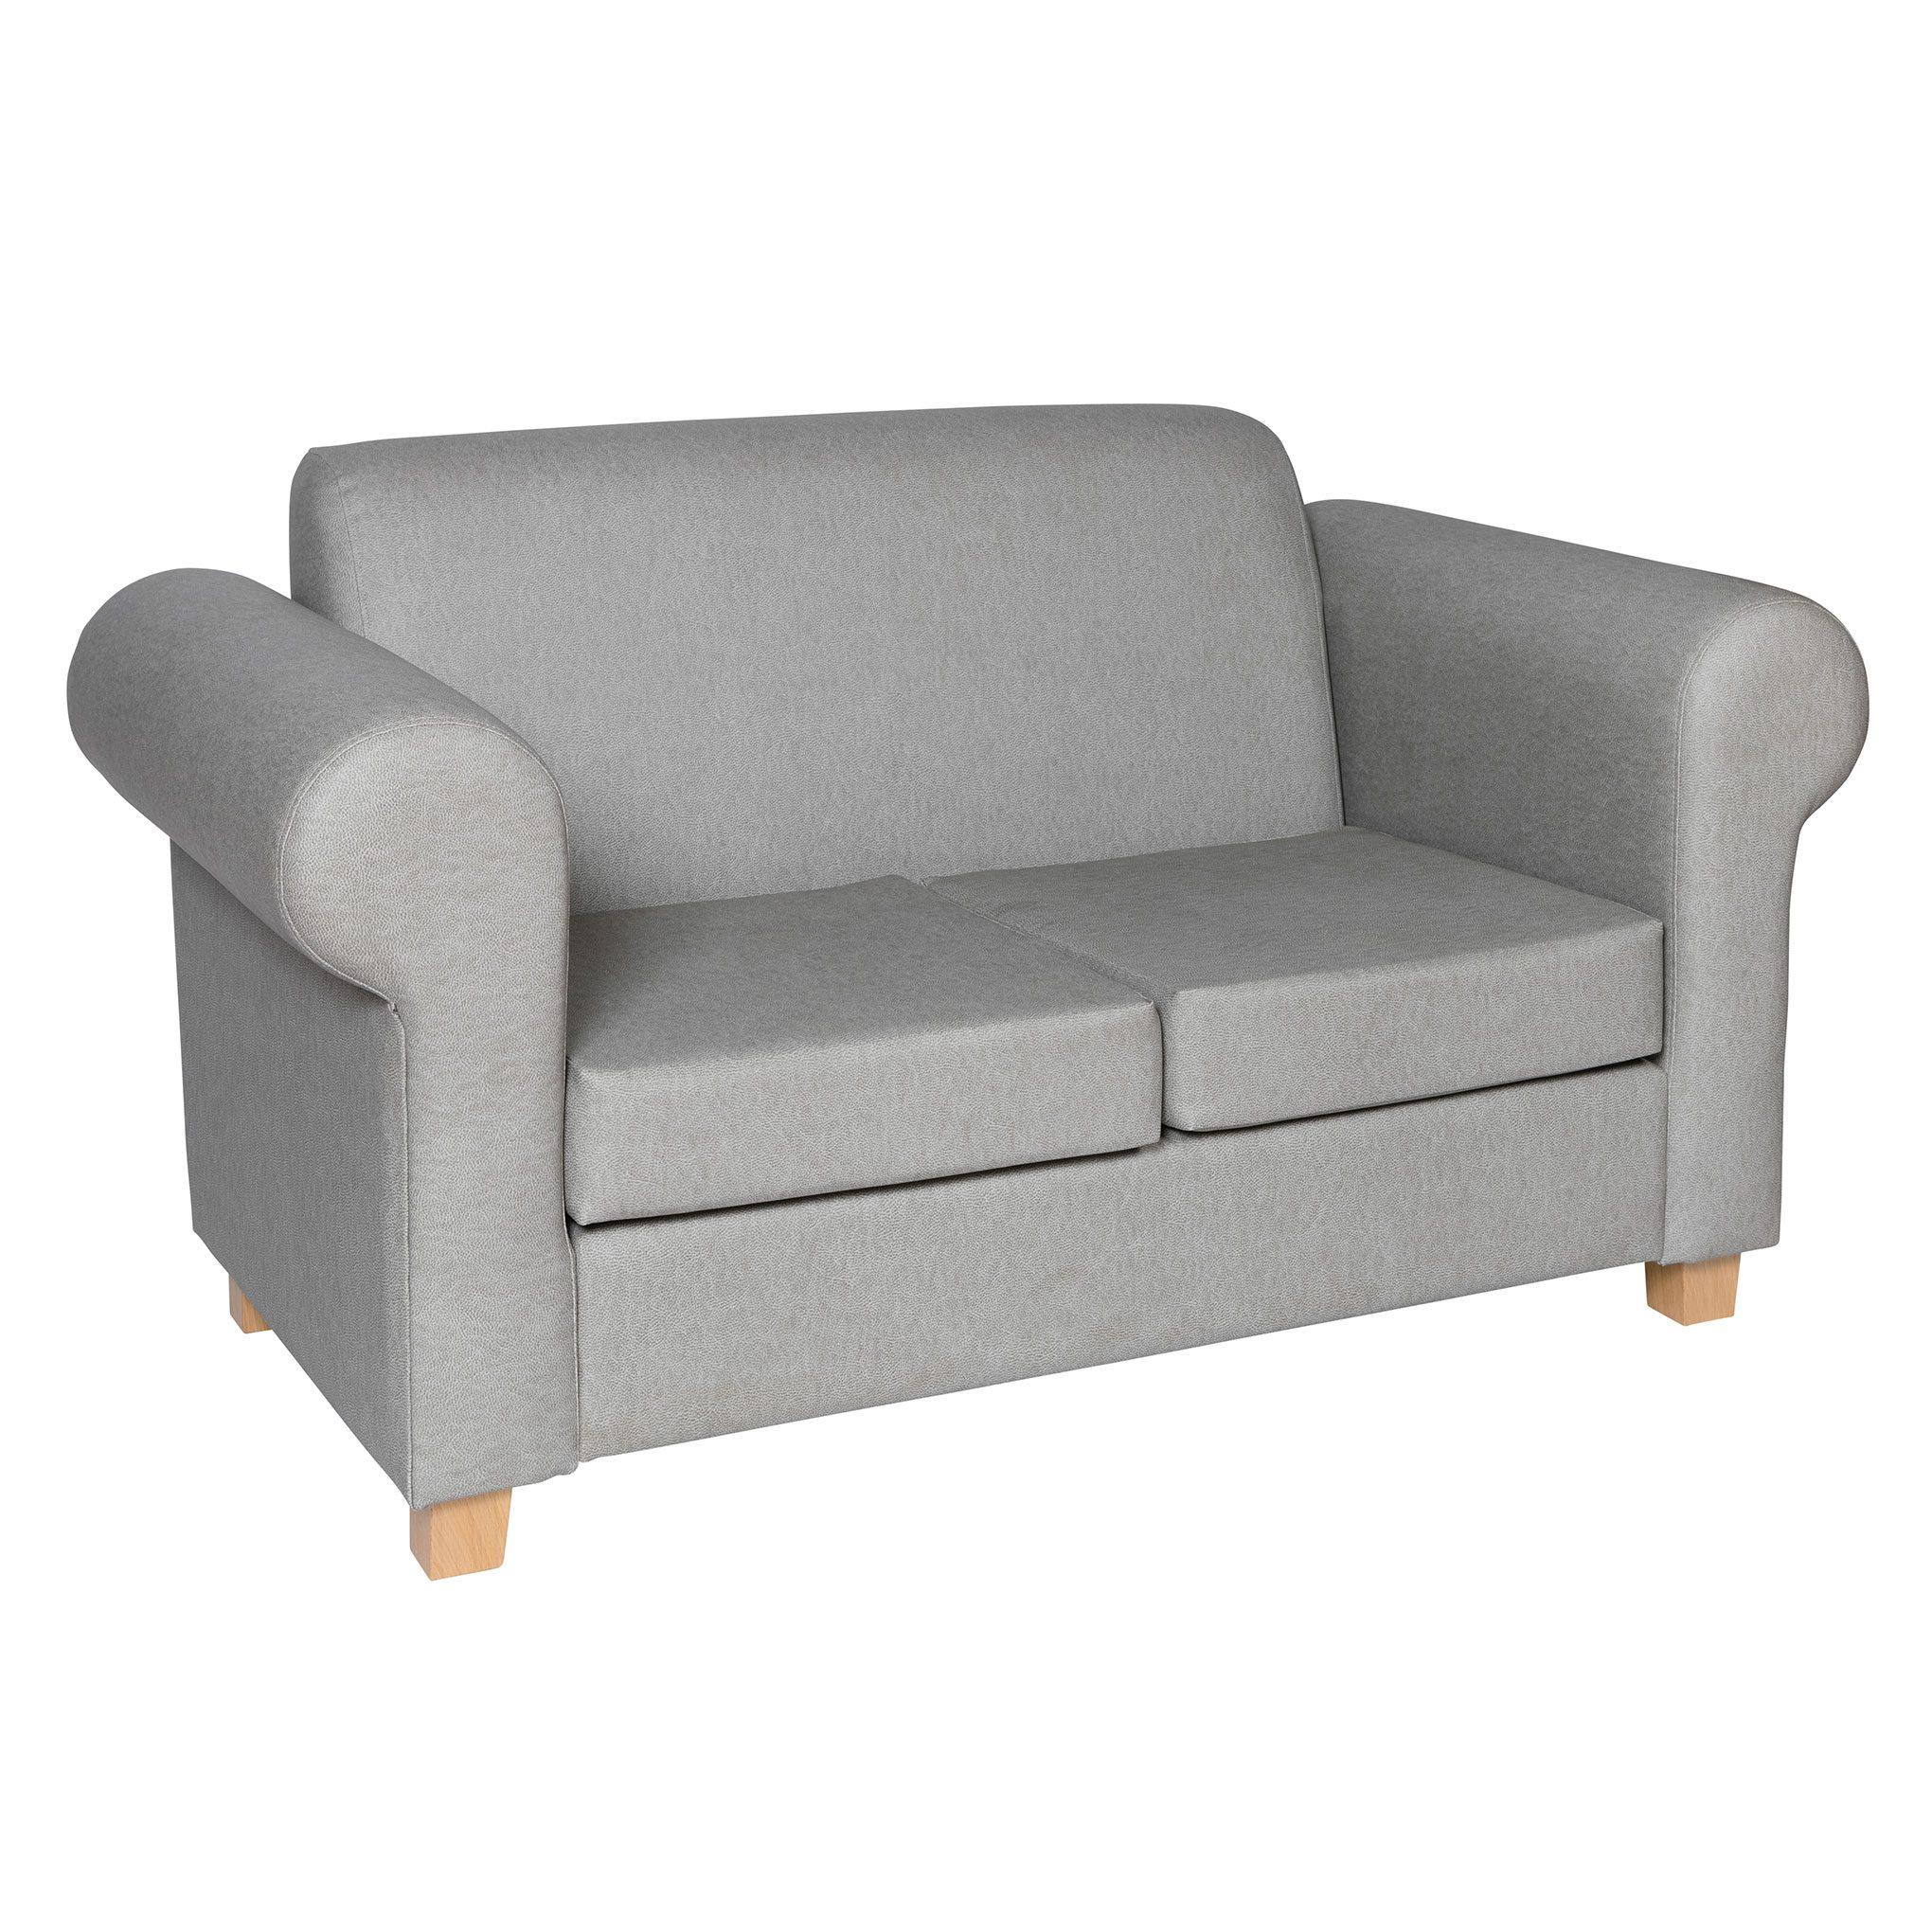 Arden 2 Seater with Roll Arm